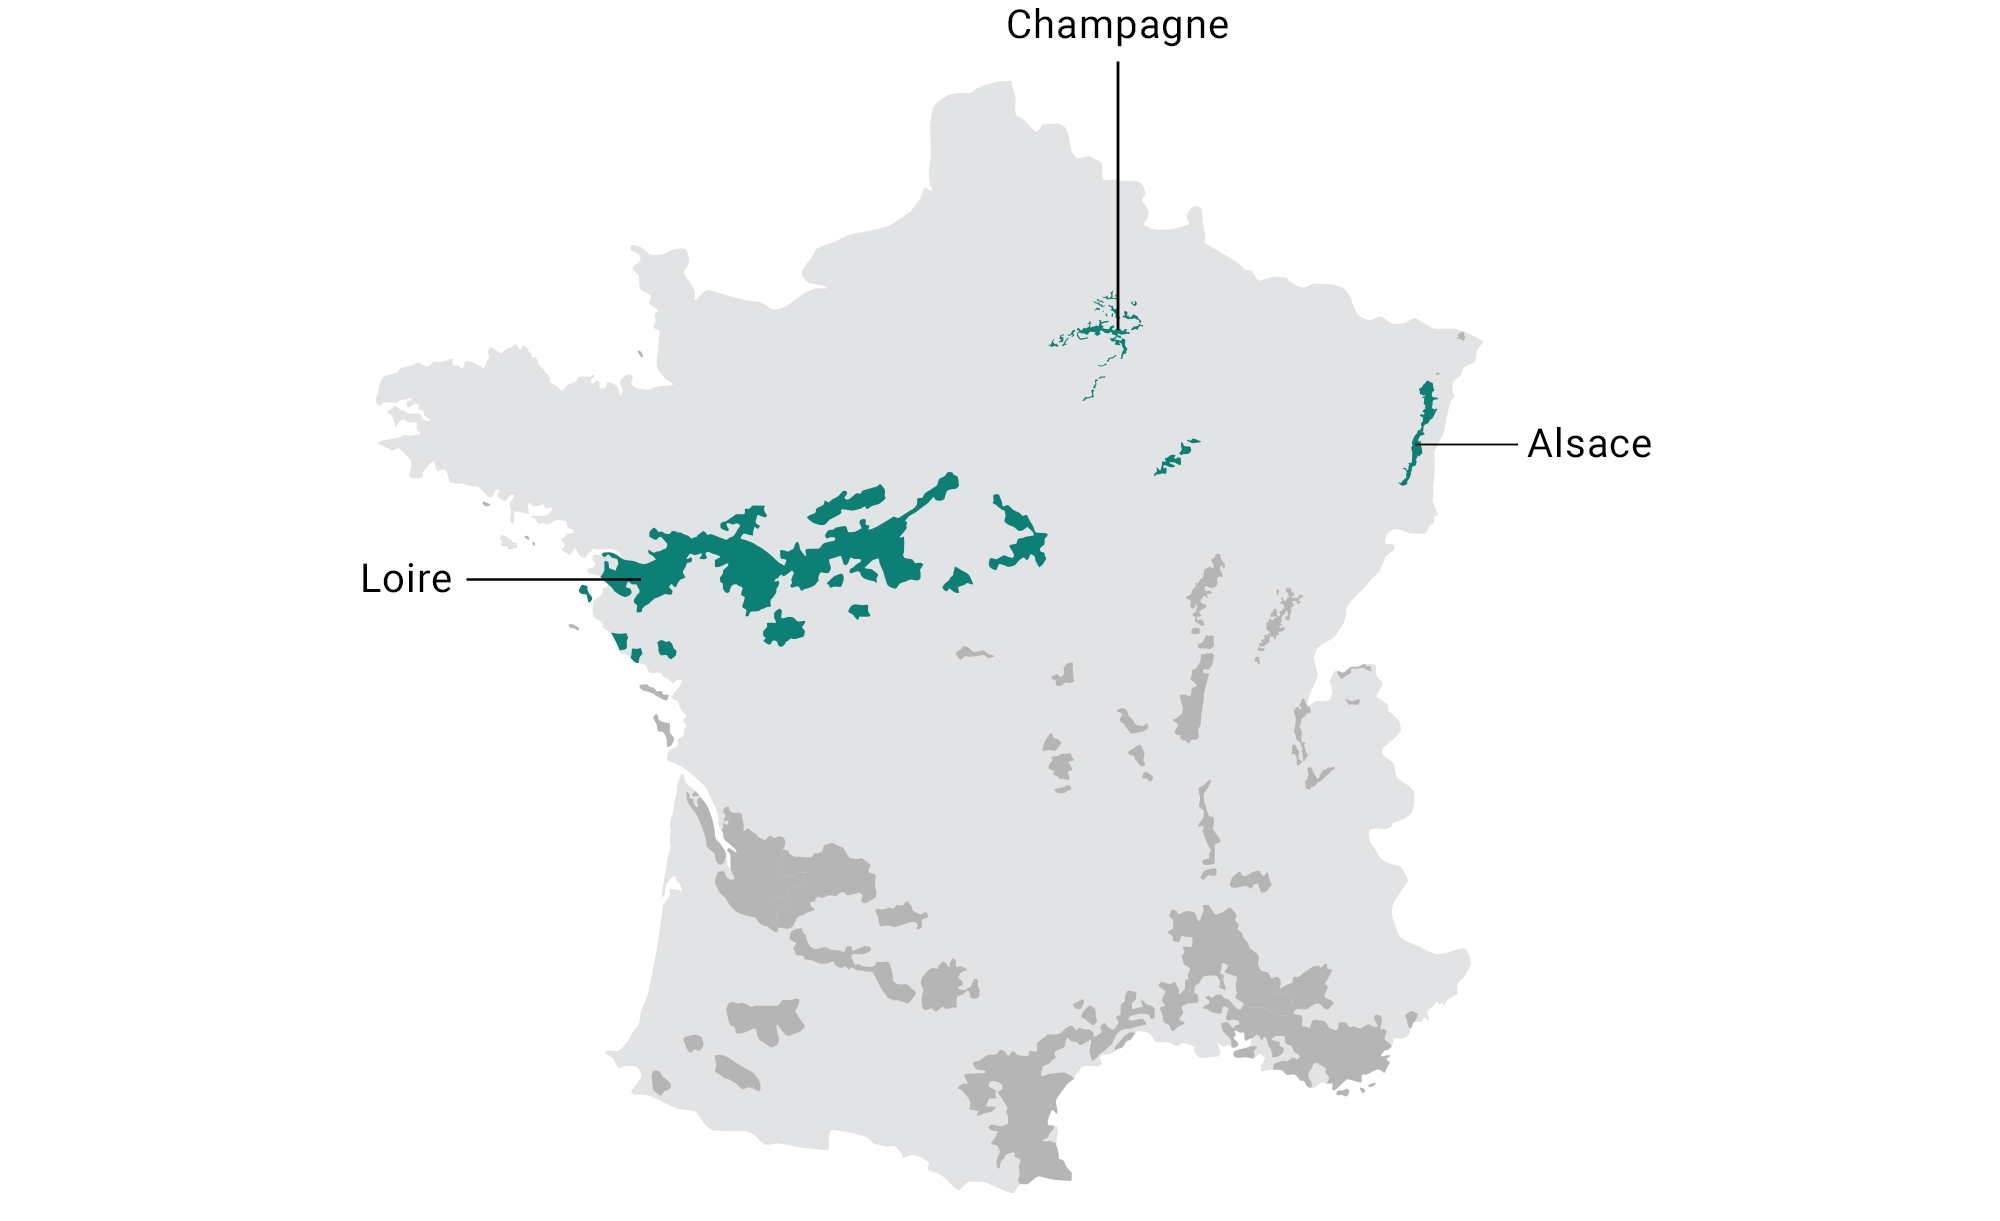 Map of French sparkling wine regions: Champagne, Alsace and Loire